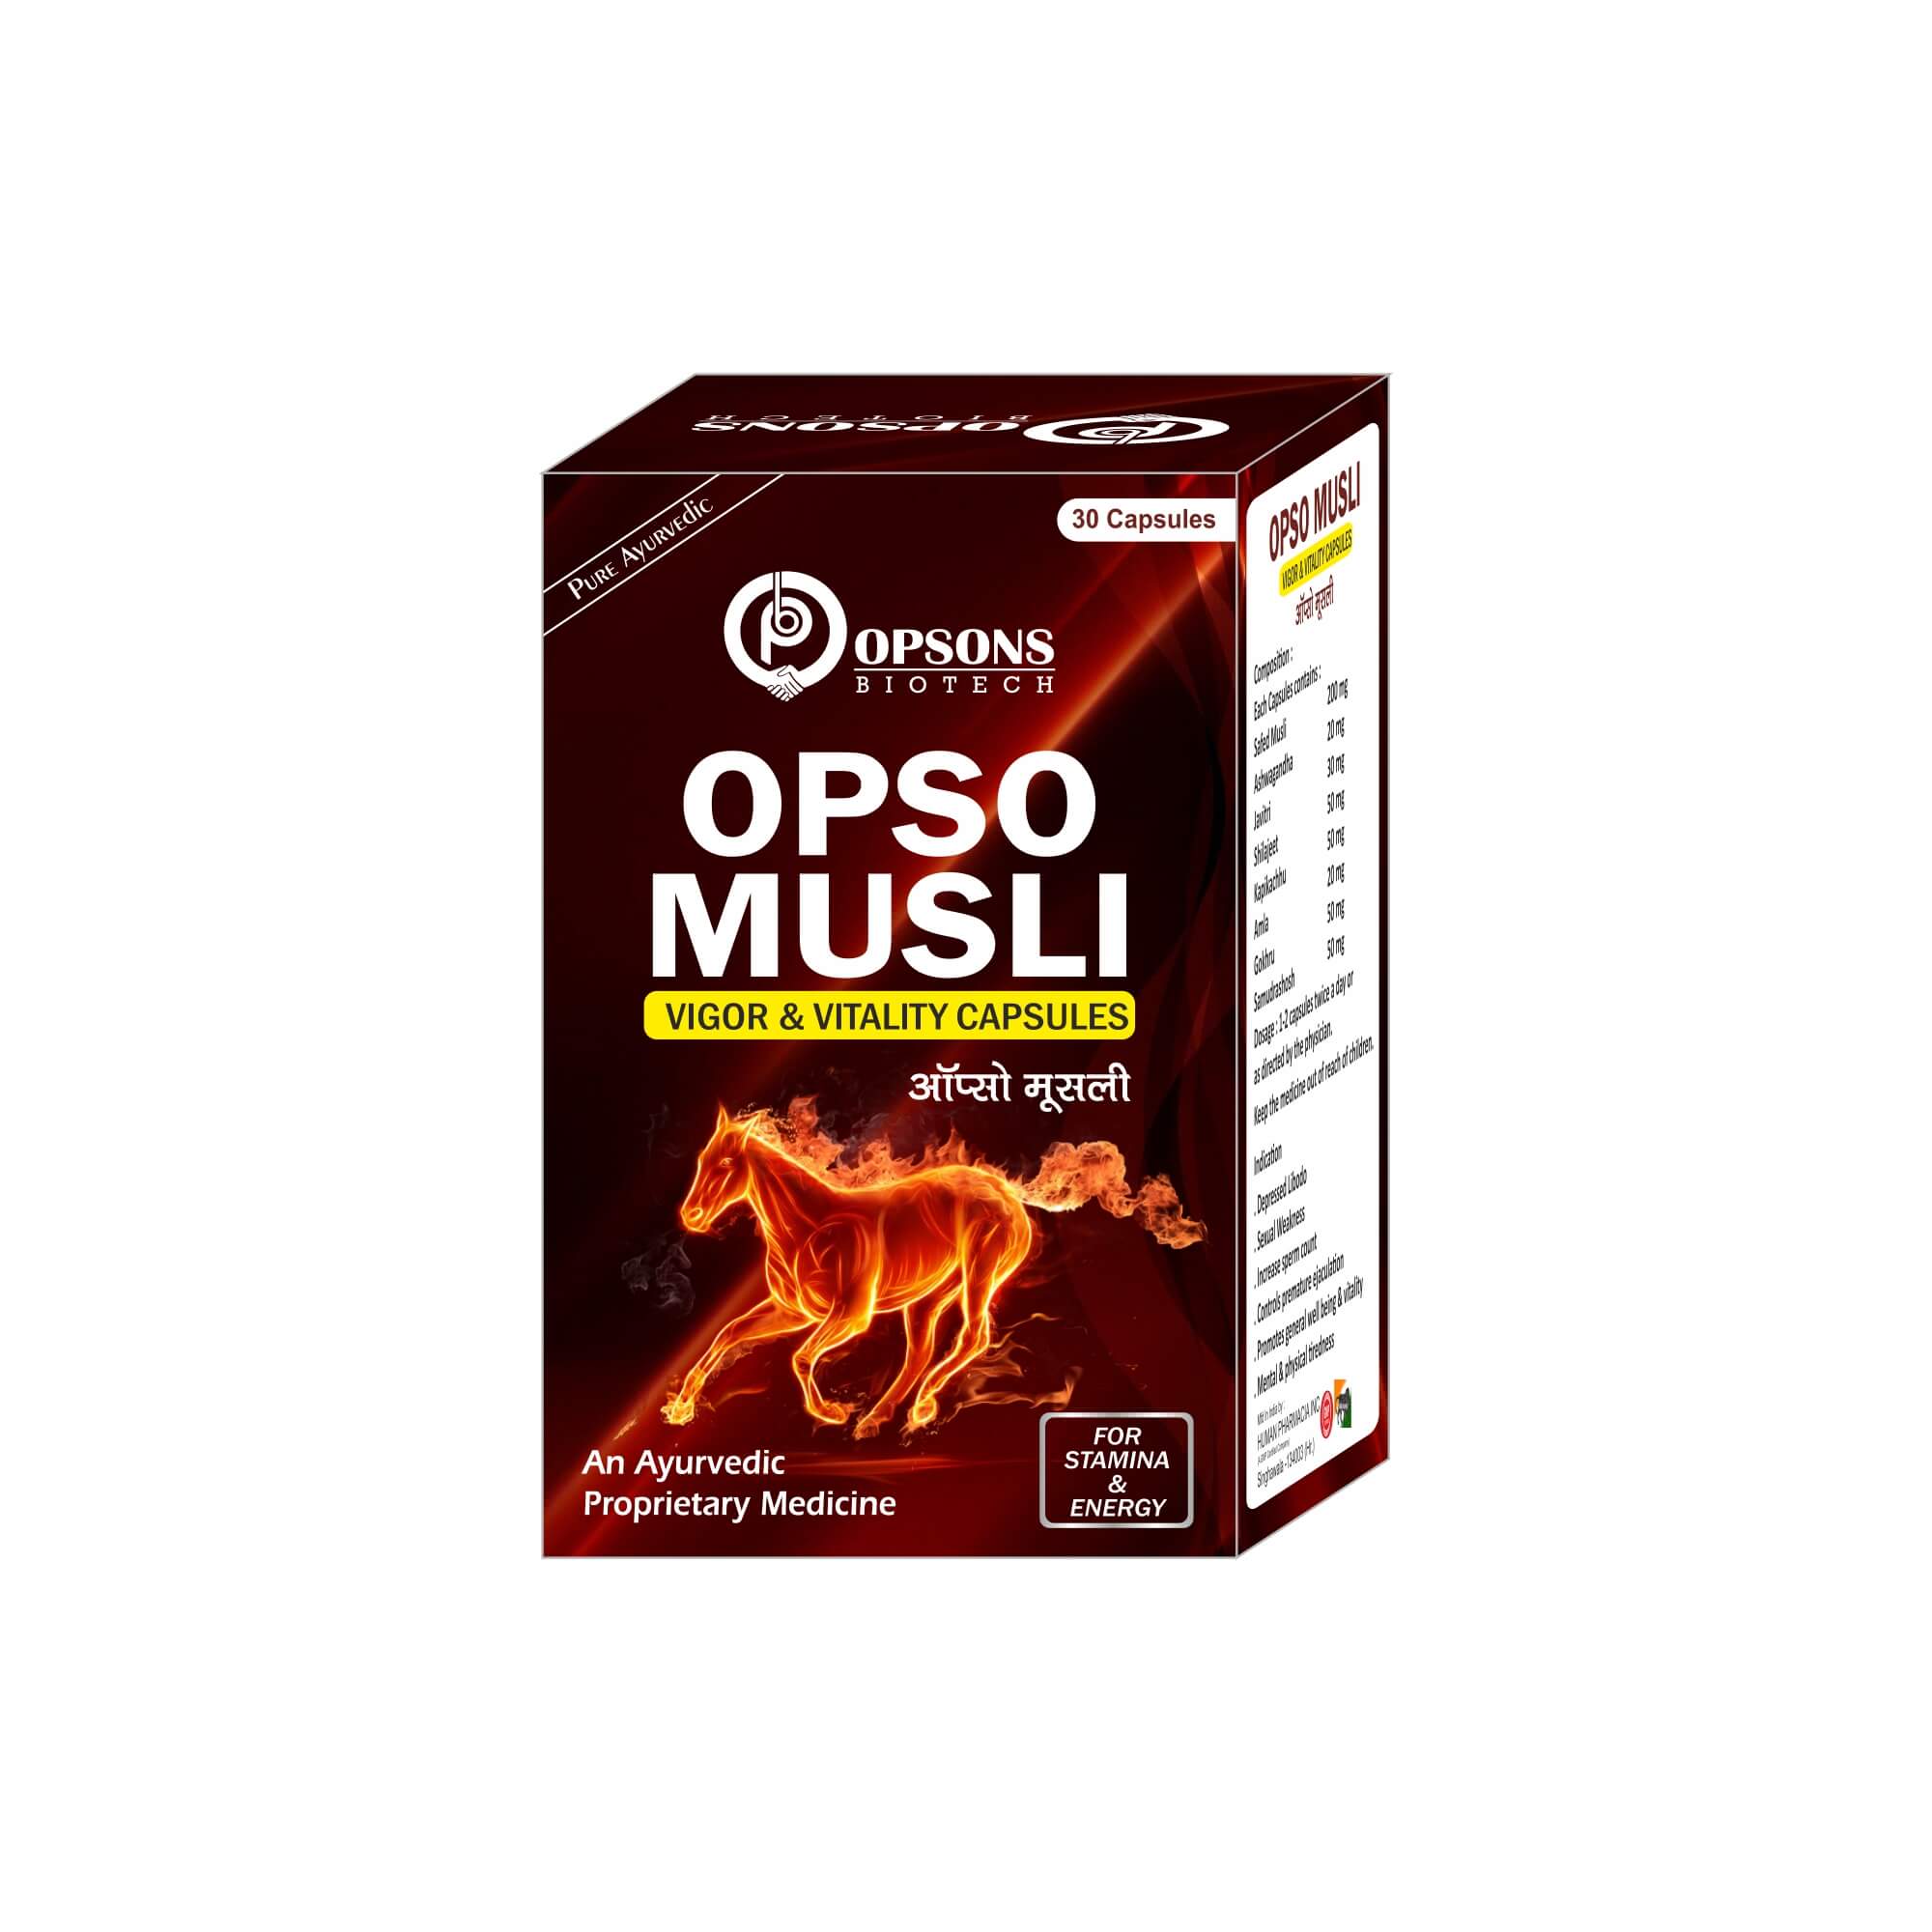 Product Name: Opso mulli capsules, Compositions of An Ayurvedic Prosperity Medicine are An Ayurvedic Prosperity Medicine - Opsons Biotech